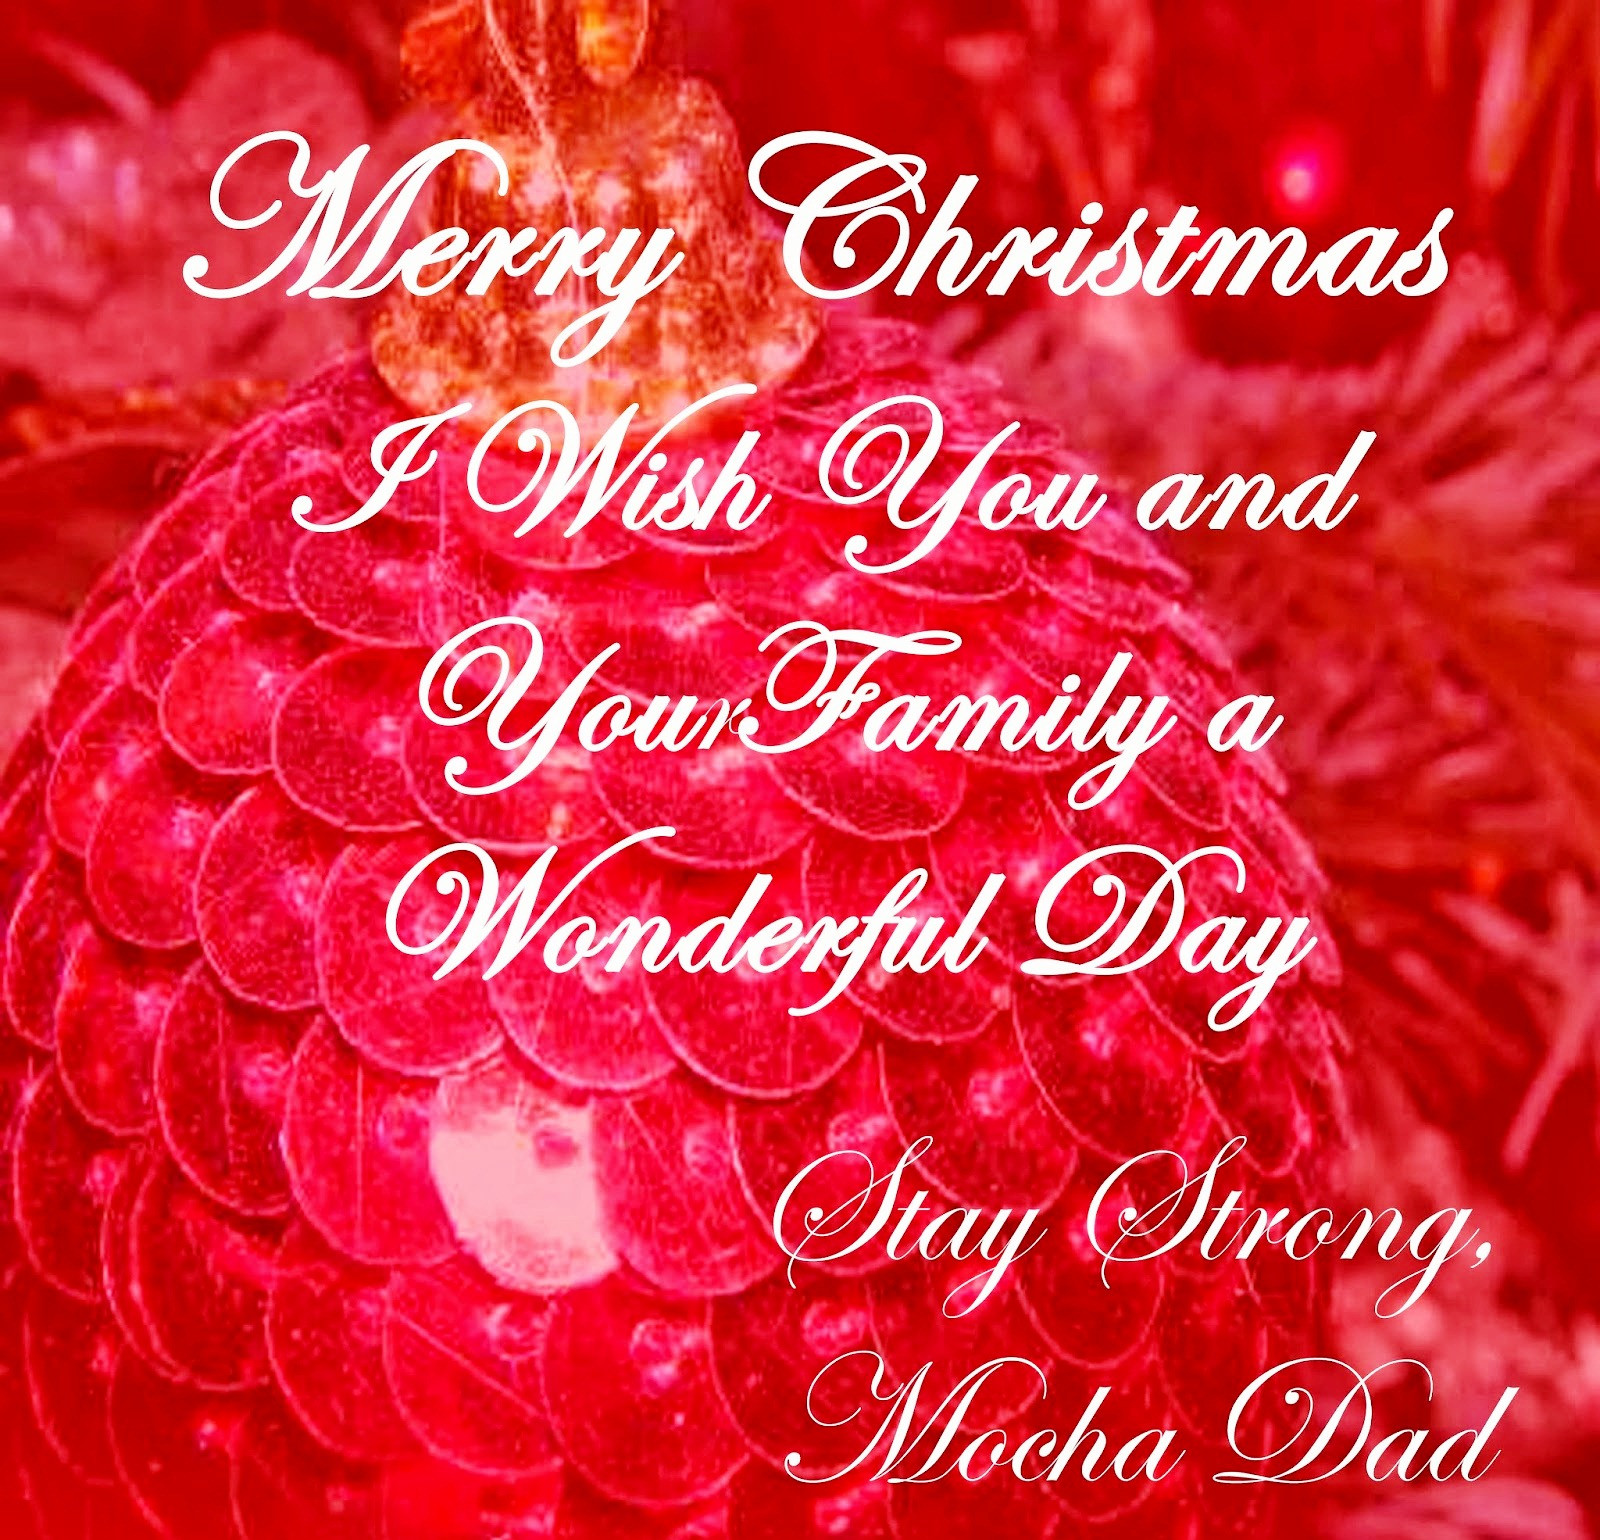 Christmas Pictures And Quotes
 20 Merry Christmas Quotes 2014